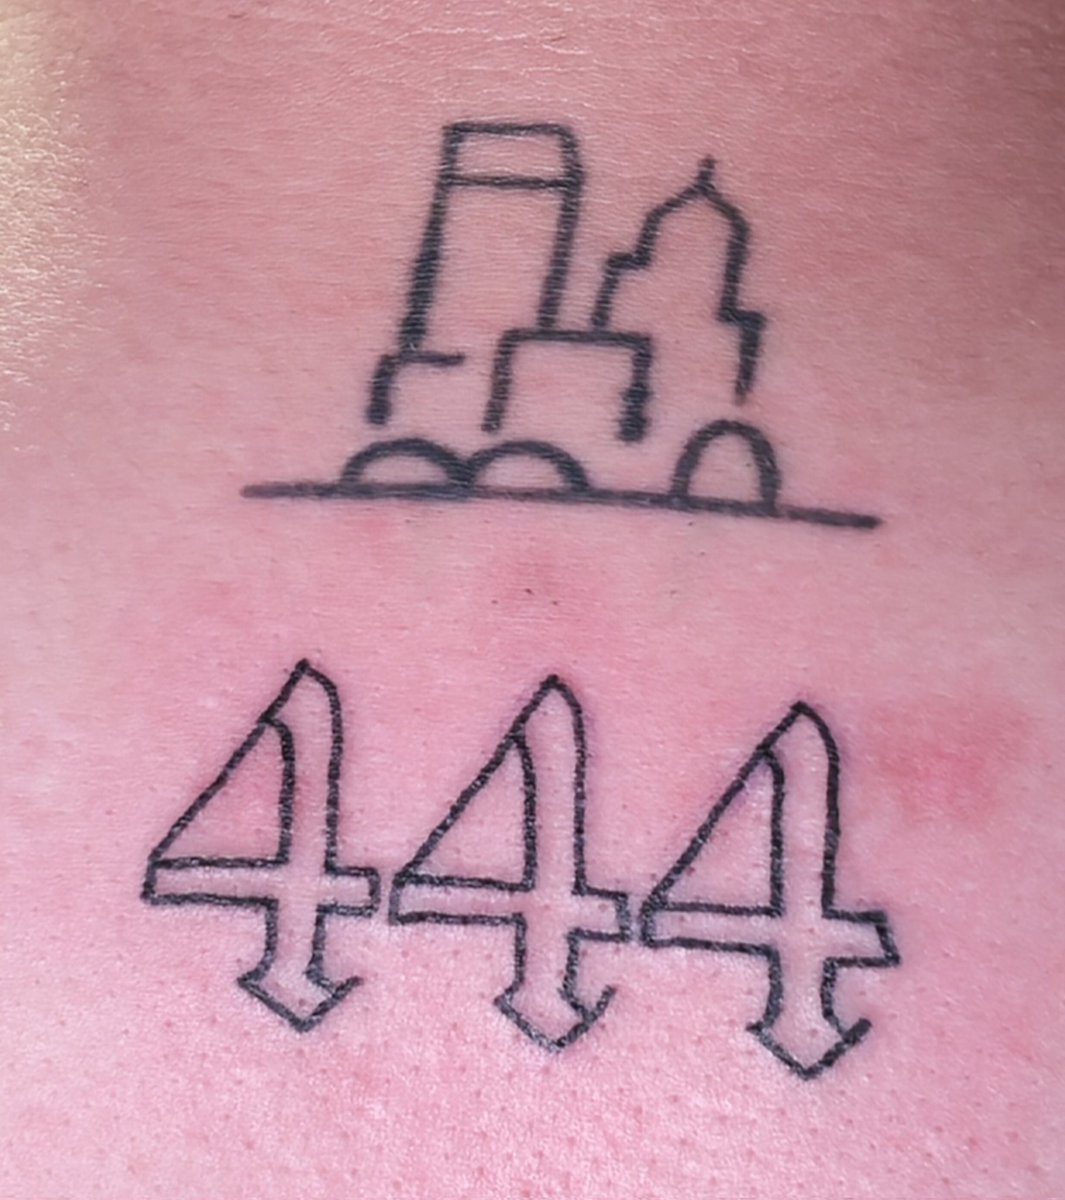 🎶 4️⃣4️⃣4️⃣ 🎶 Can't believe You're in this world living your life And I'm here for it We can talk day and night We can go for a hike Ride down the street on our bikes #444 #Life #Love youtu.be/_rbuFwWBXVg